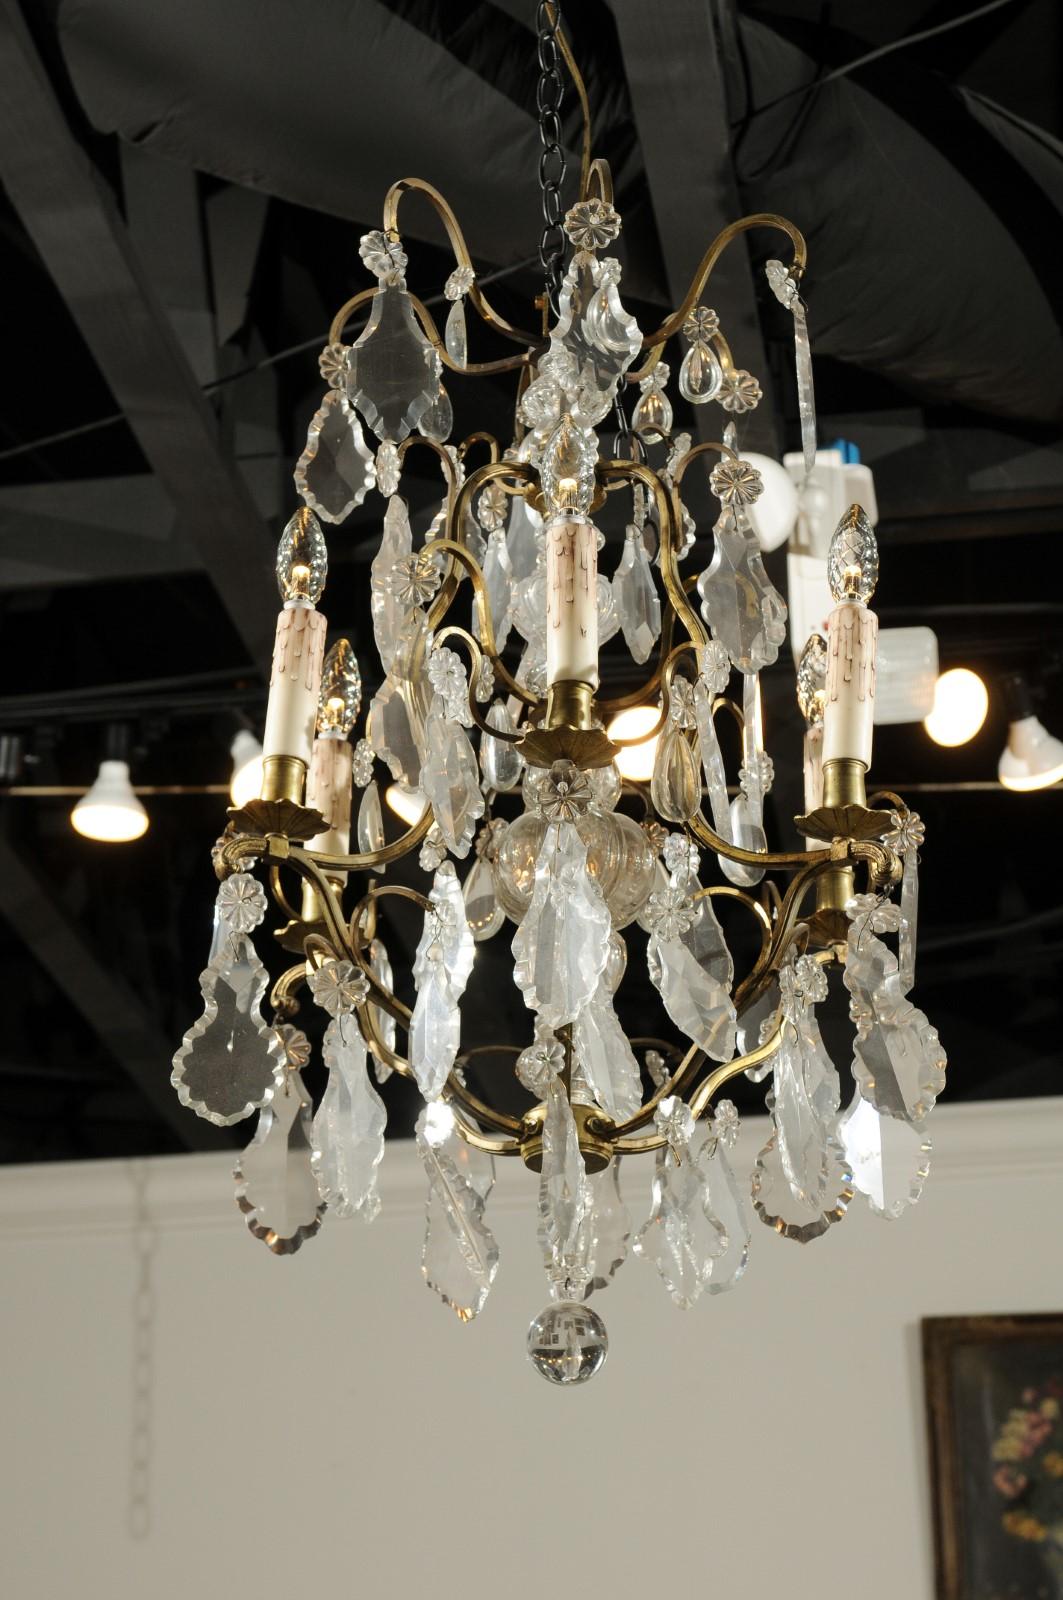 French 19th Century Six-Light Bronze and Crystal Chandelier with Scrolling Arms For Sale 8